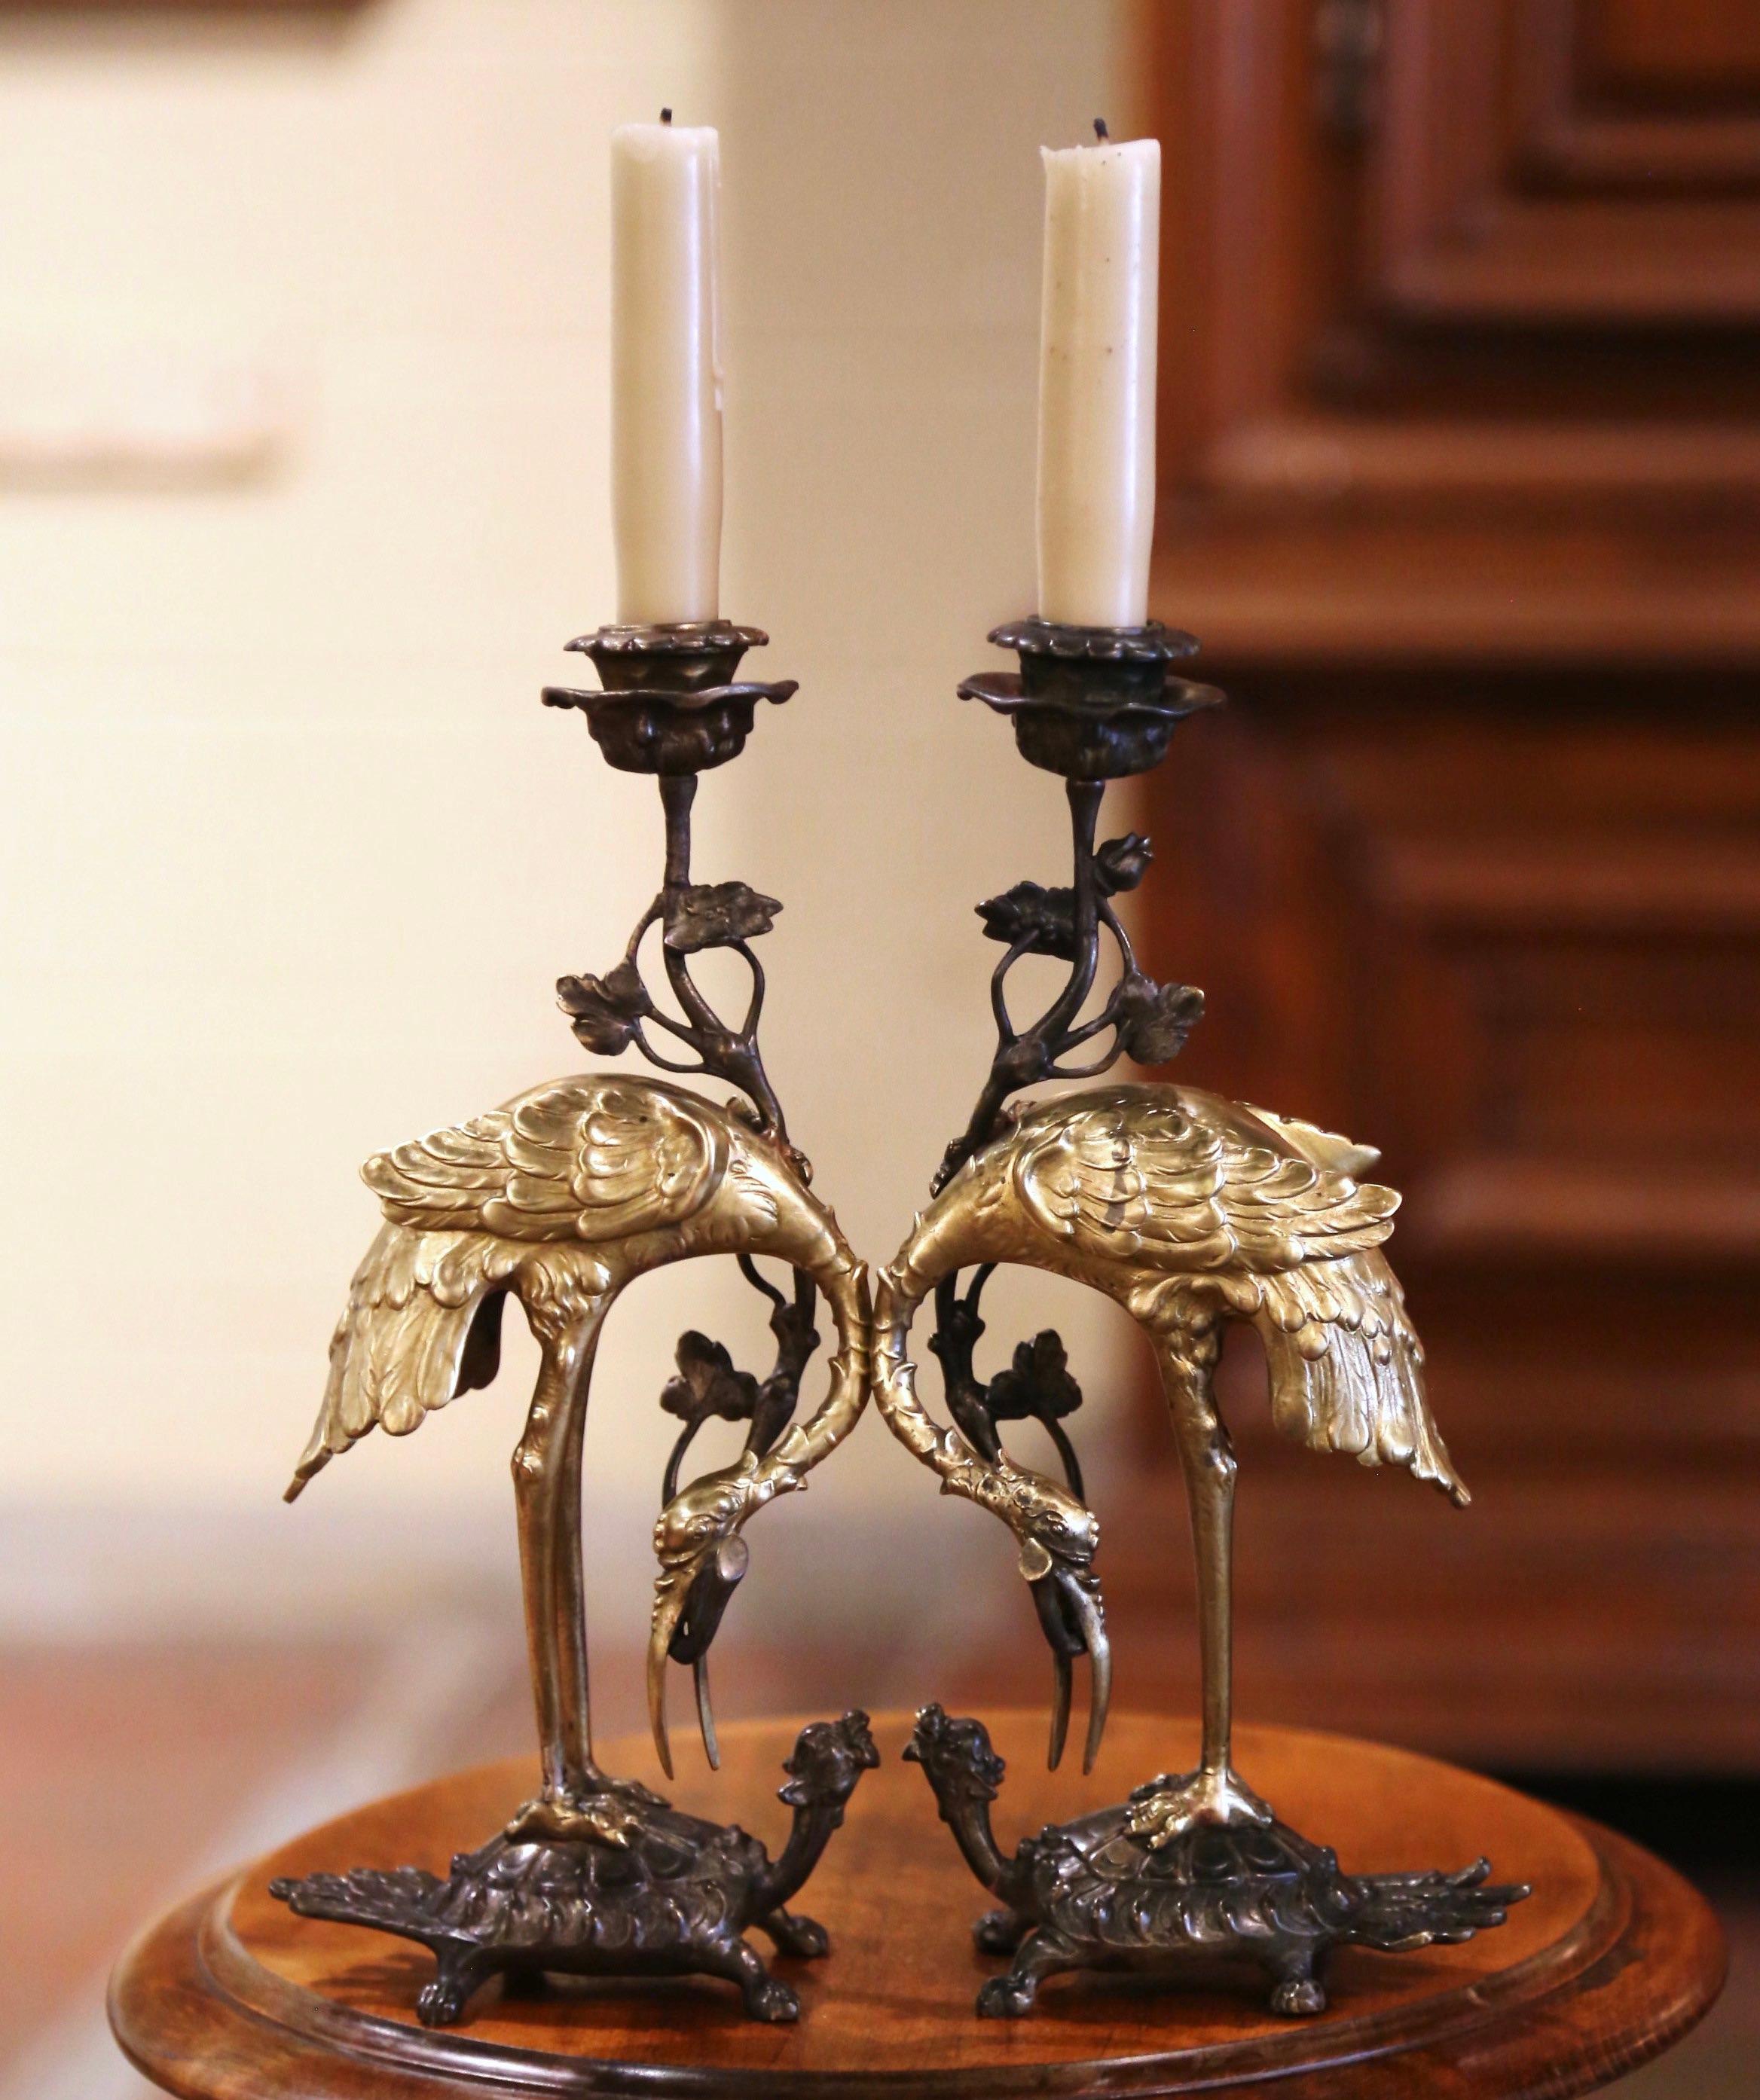 Cast Pair of 19th Century Japanese Bronze Crane and Turtle Candle Holders